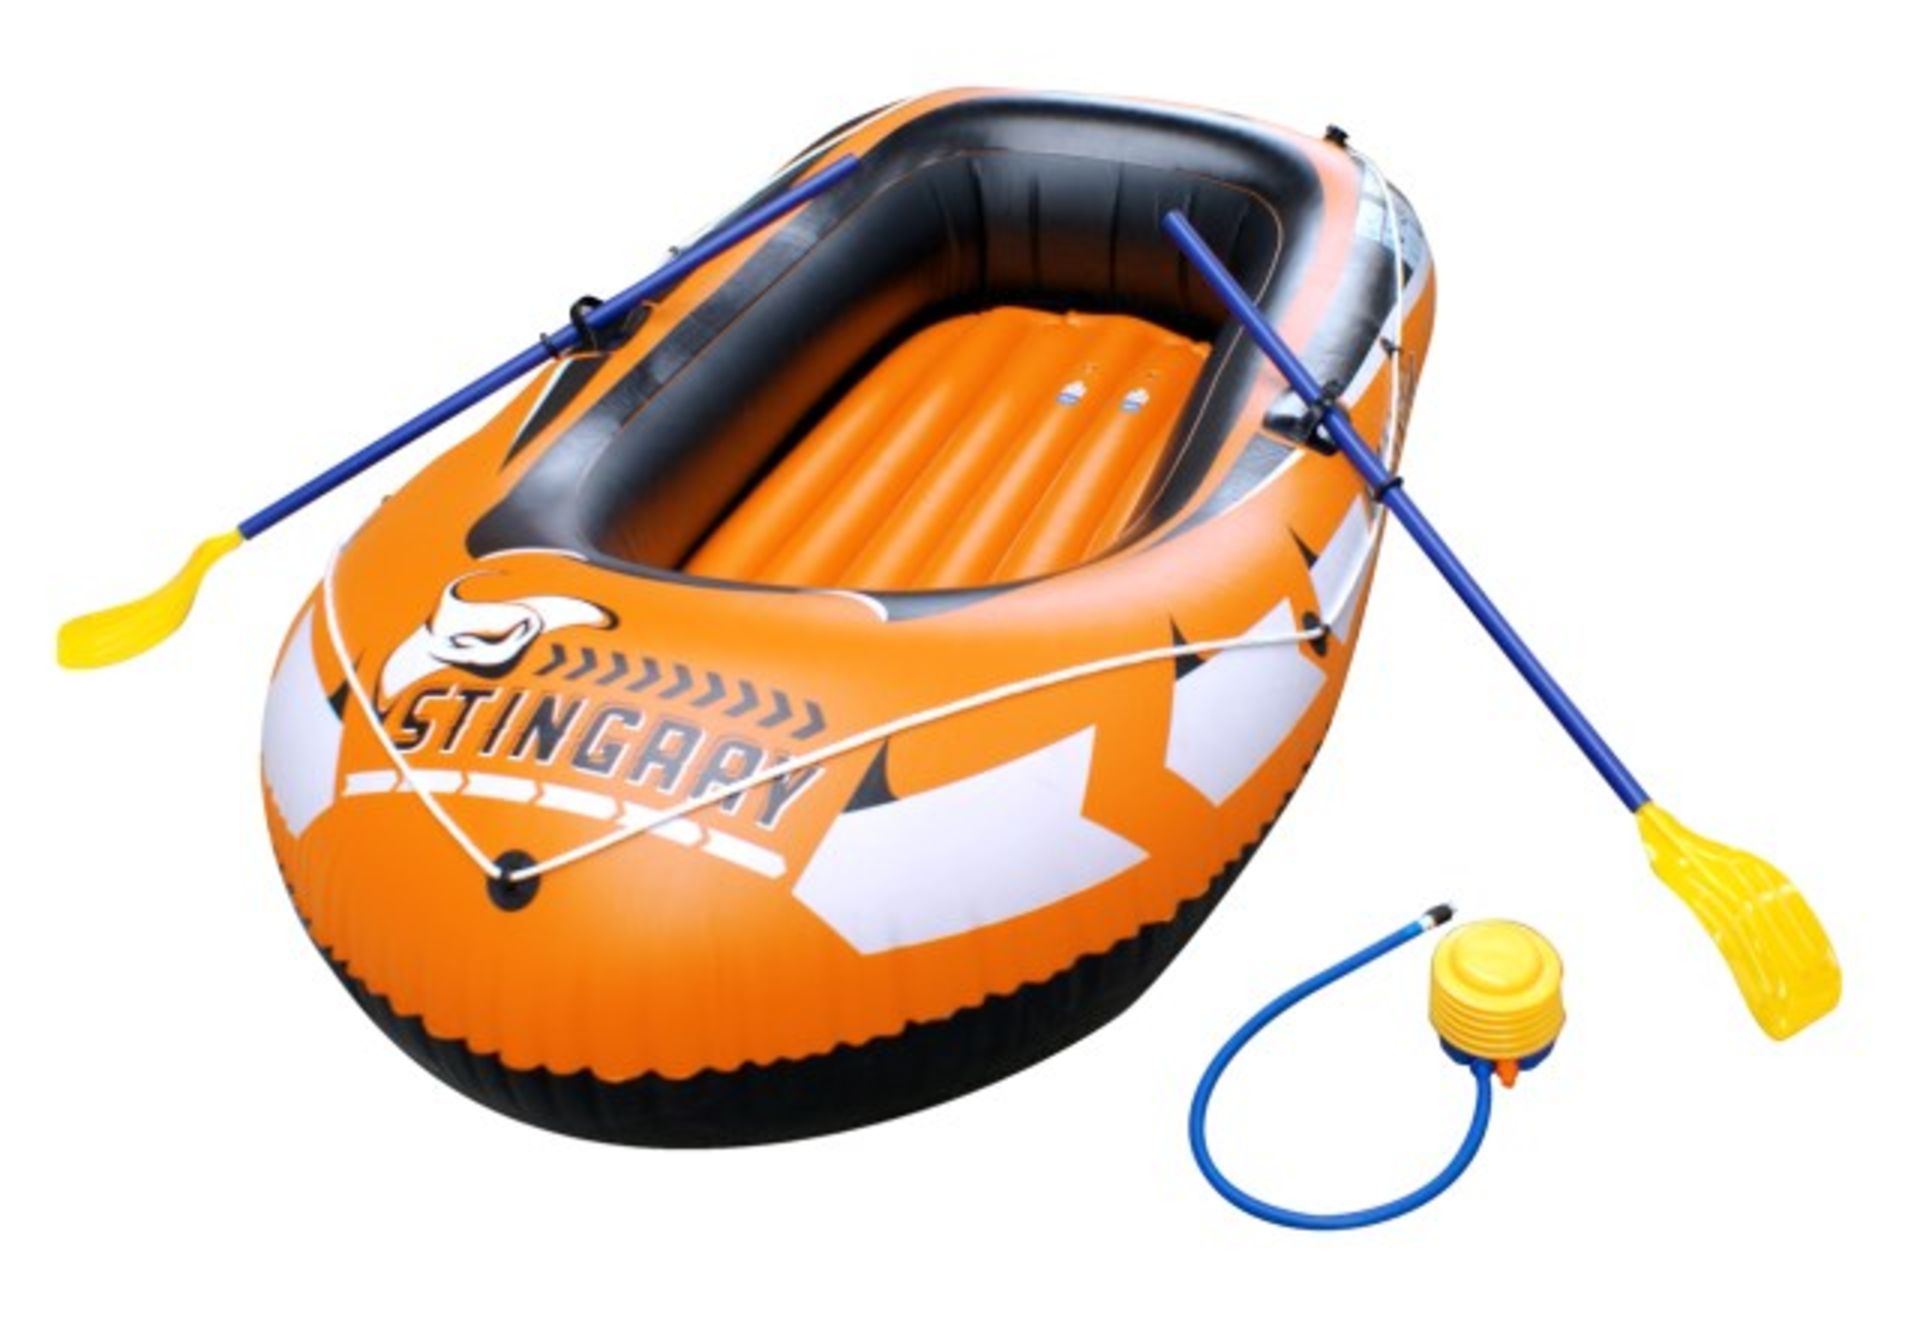 V Extra Large Three Man Dinghy With Oars, Pump Etc RRP £99.99 - Image 2 of 2